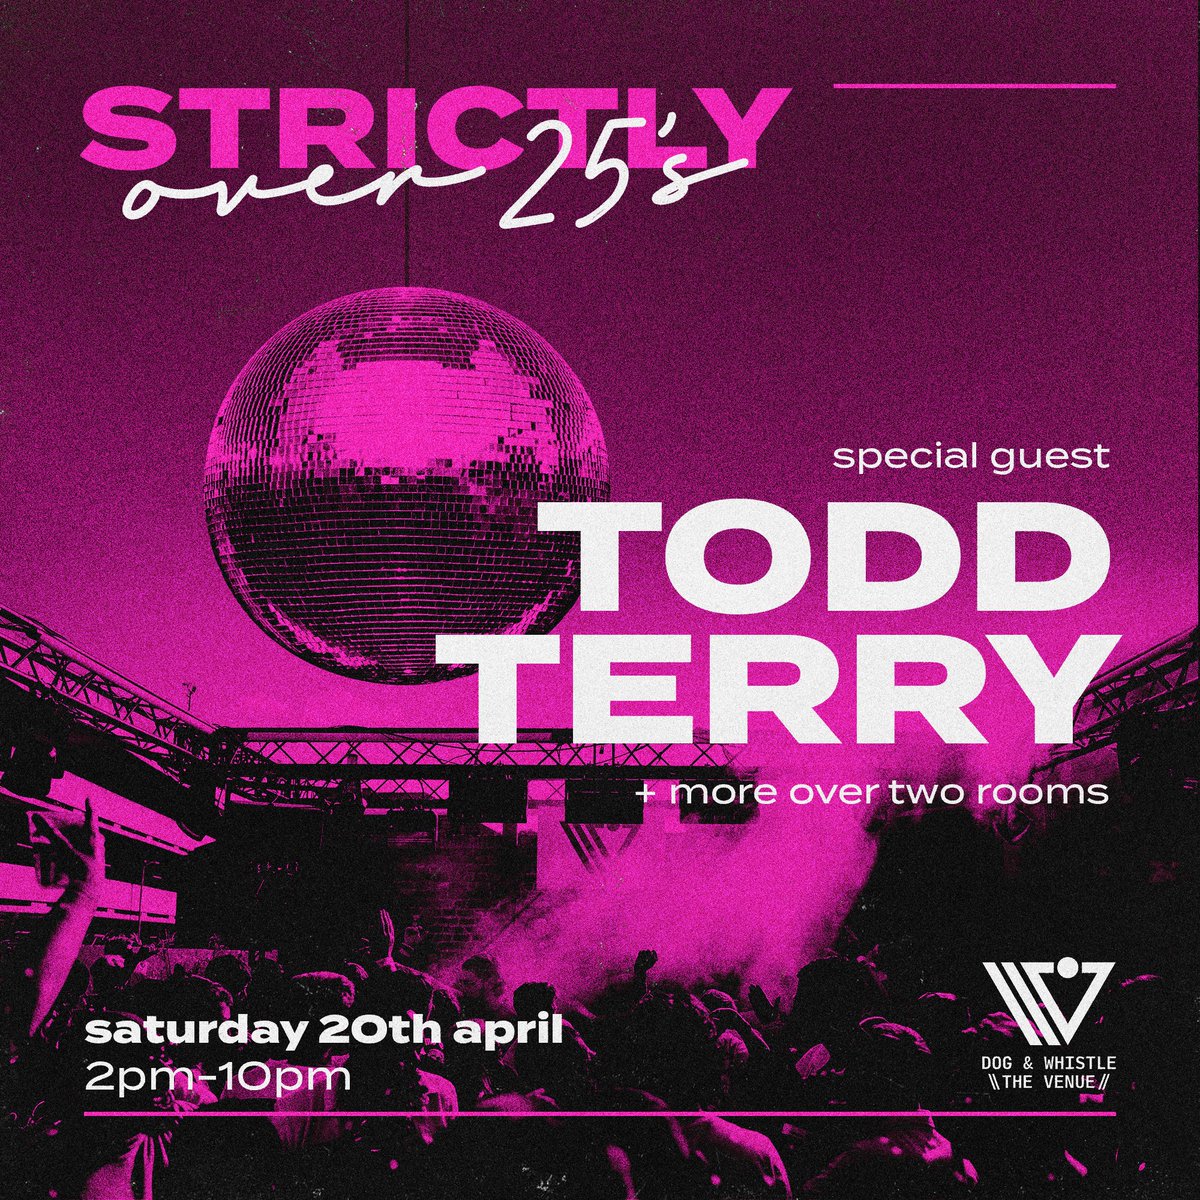 Saturday STRICTLY OVER 25'S special guest TODD TERRY @djtoddterry at DOG & WHISTLE 112 FORE ST, HERTFORD, SG14 1AB UNITED KINGDOM Tickets & Info : events.liveit.io/dog-and-whistl…